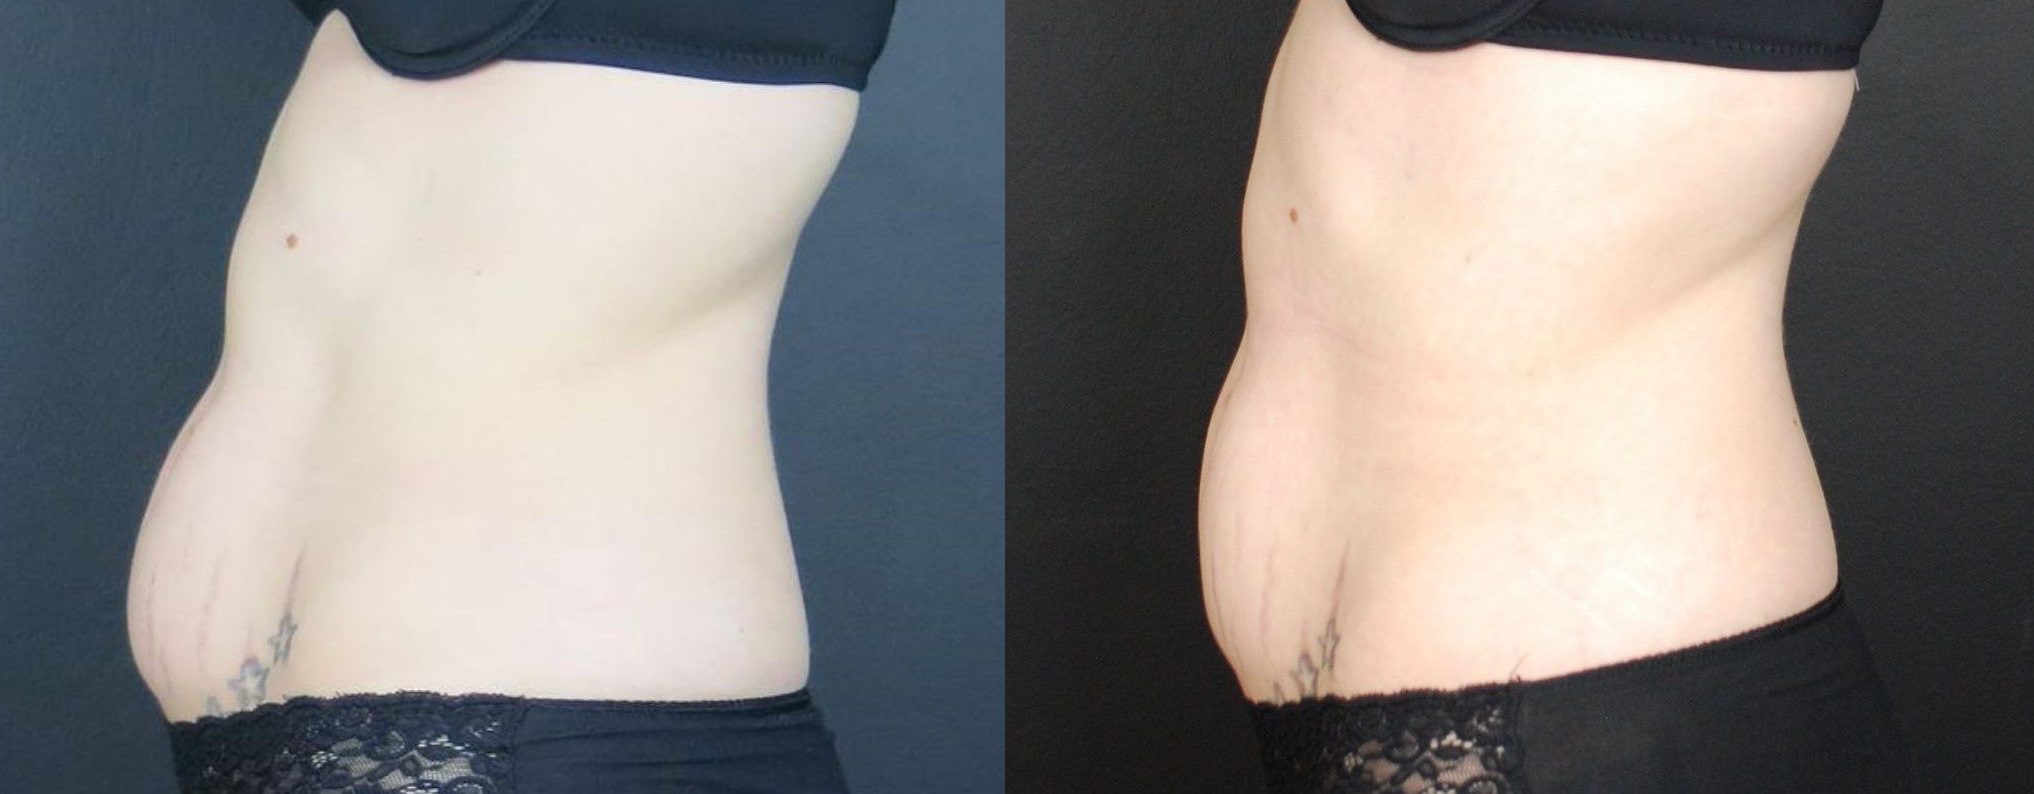 coolsculpting mummy tummy before and after